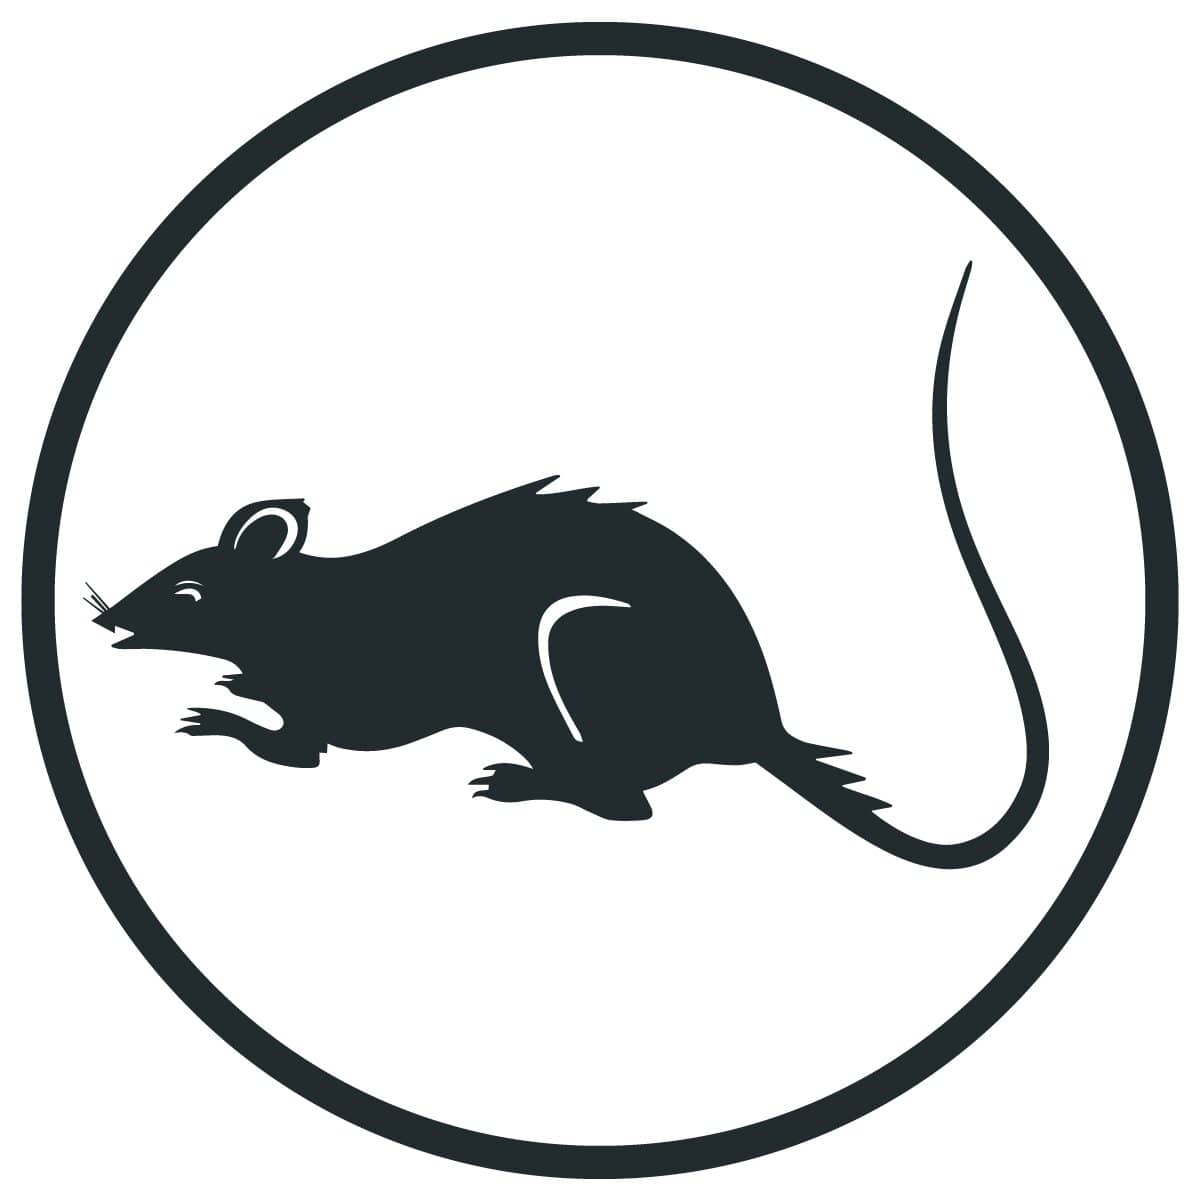 Rats pest control service in sydney for homes and businesses